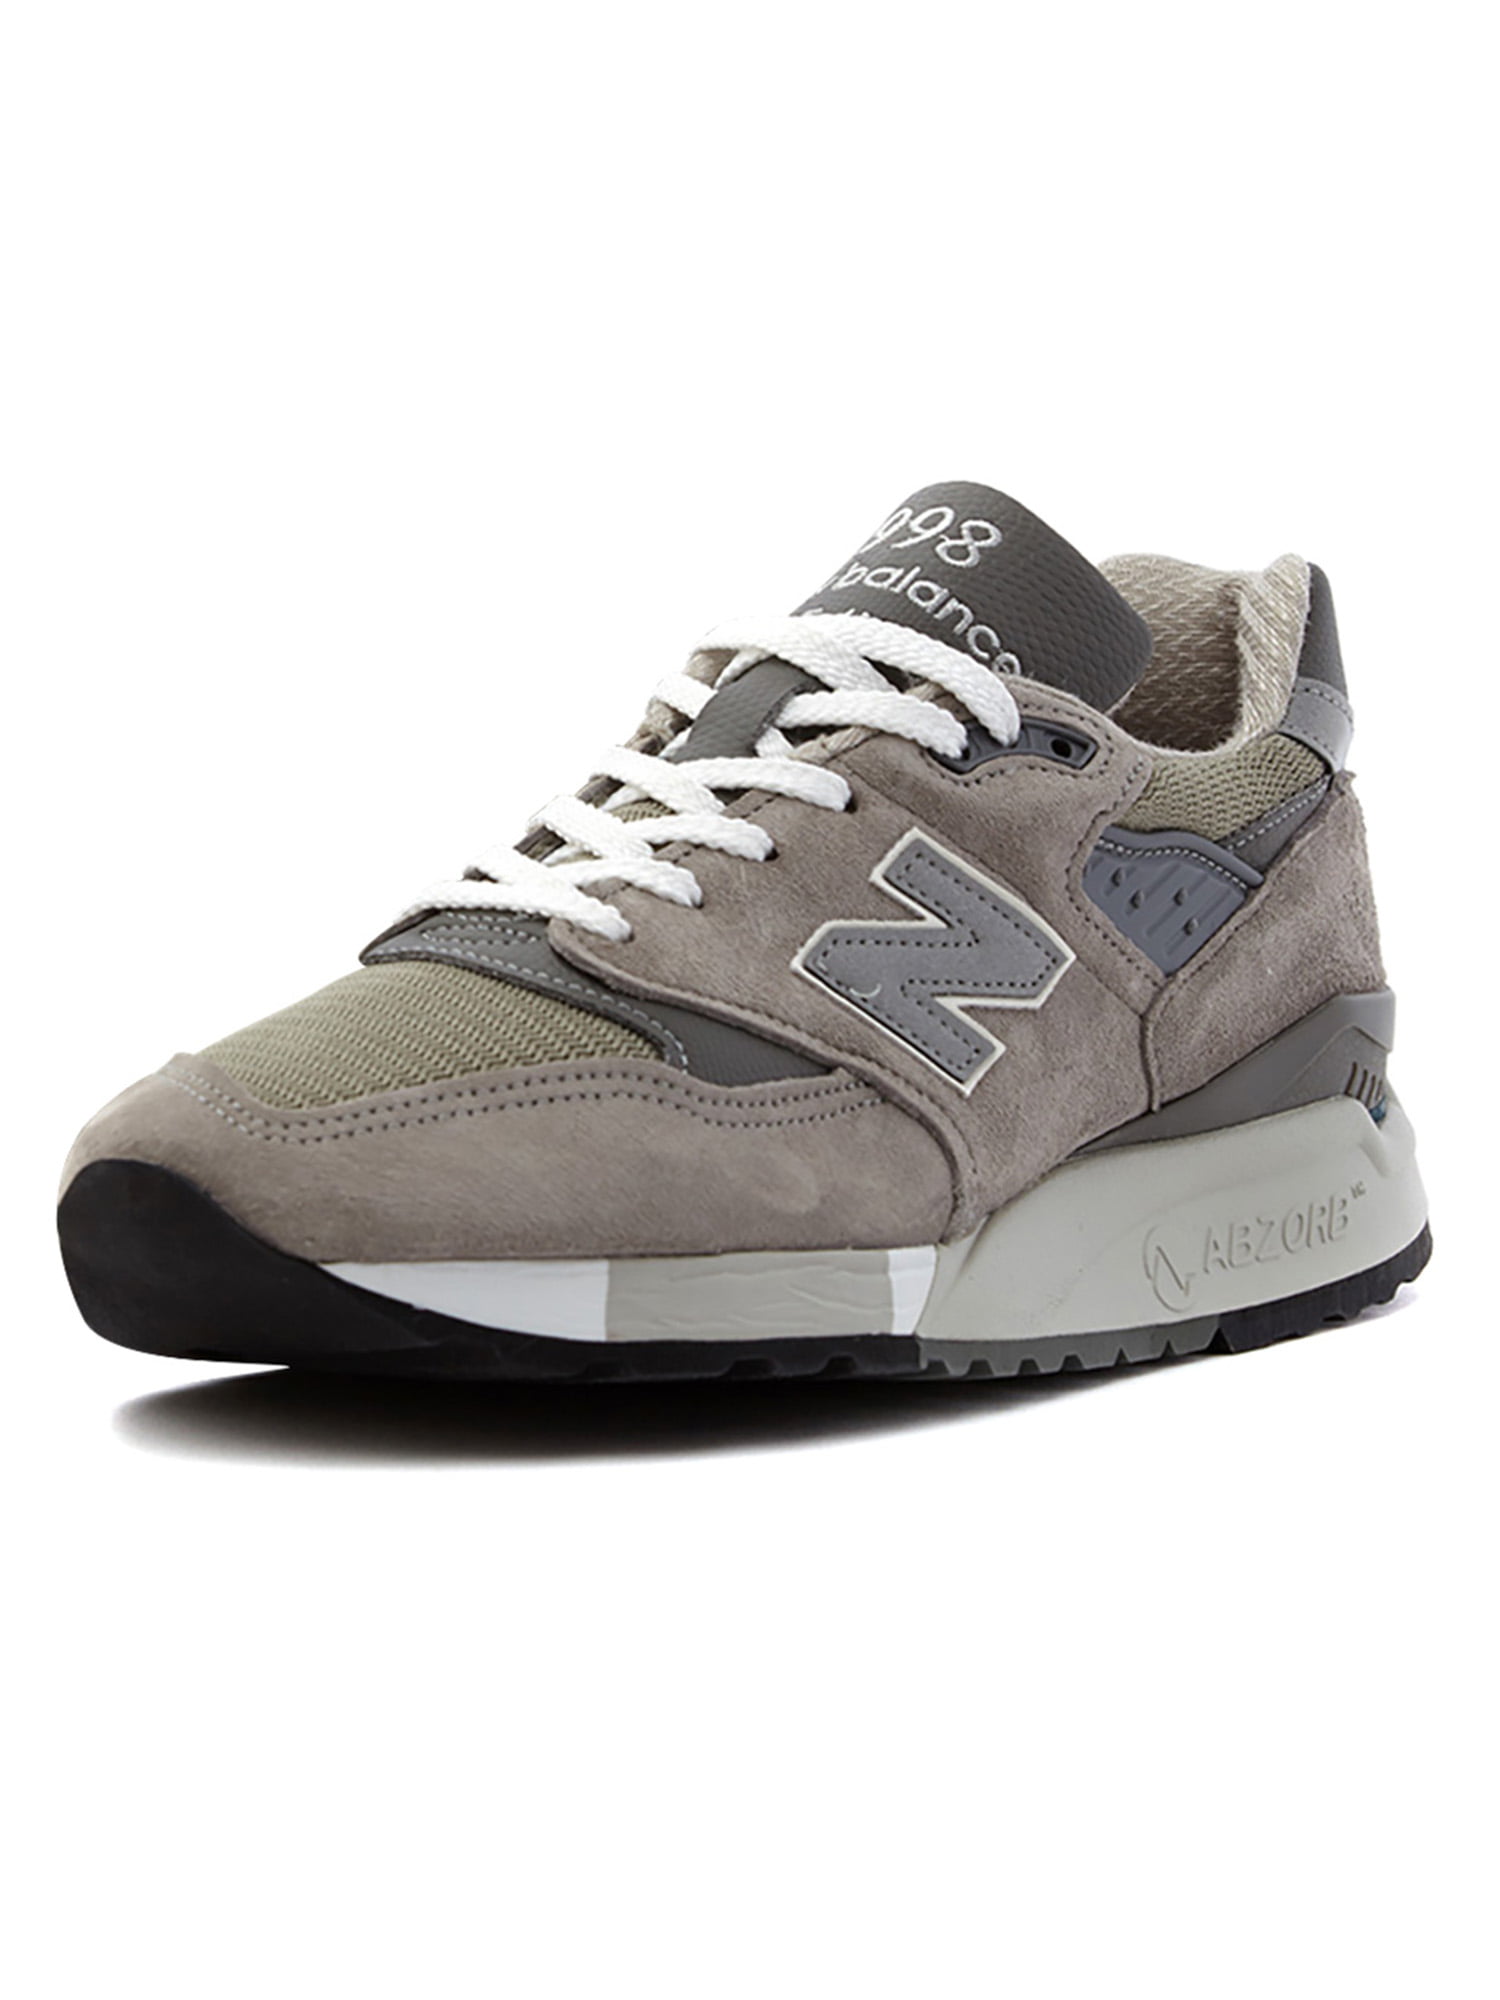 New Balance Men's 998 Made In USA Bringback Sneakers M998 Light